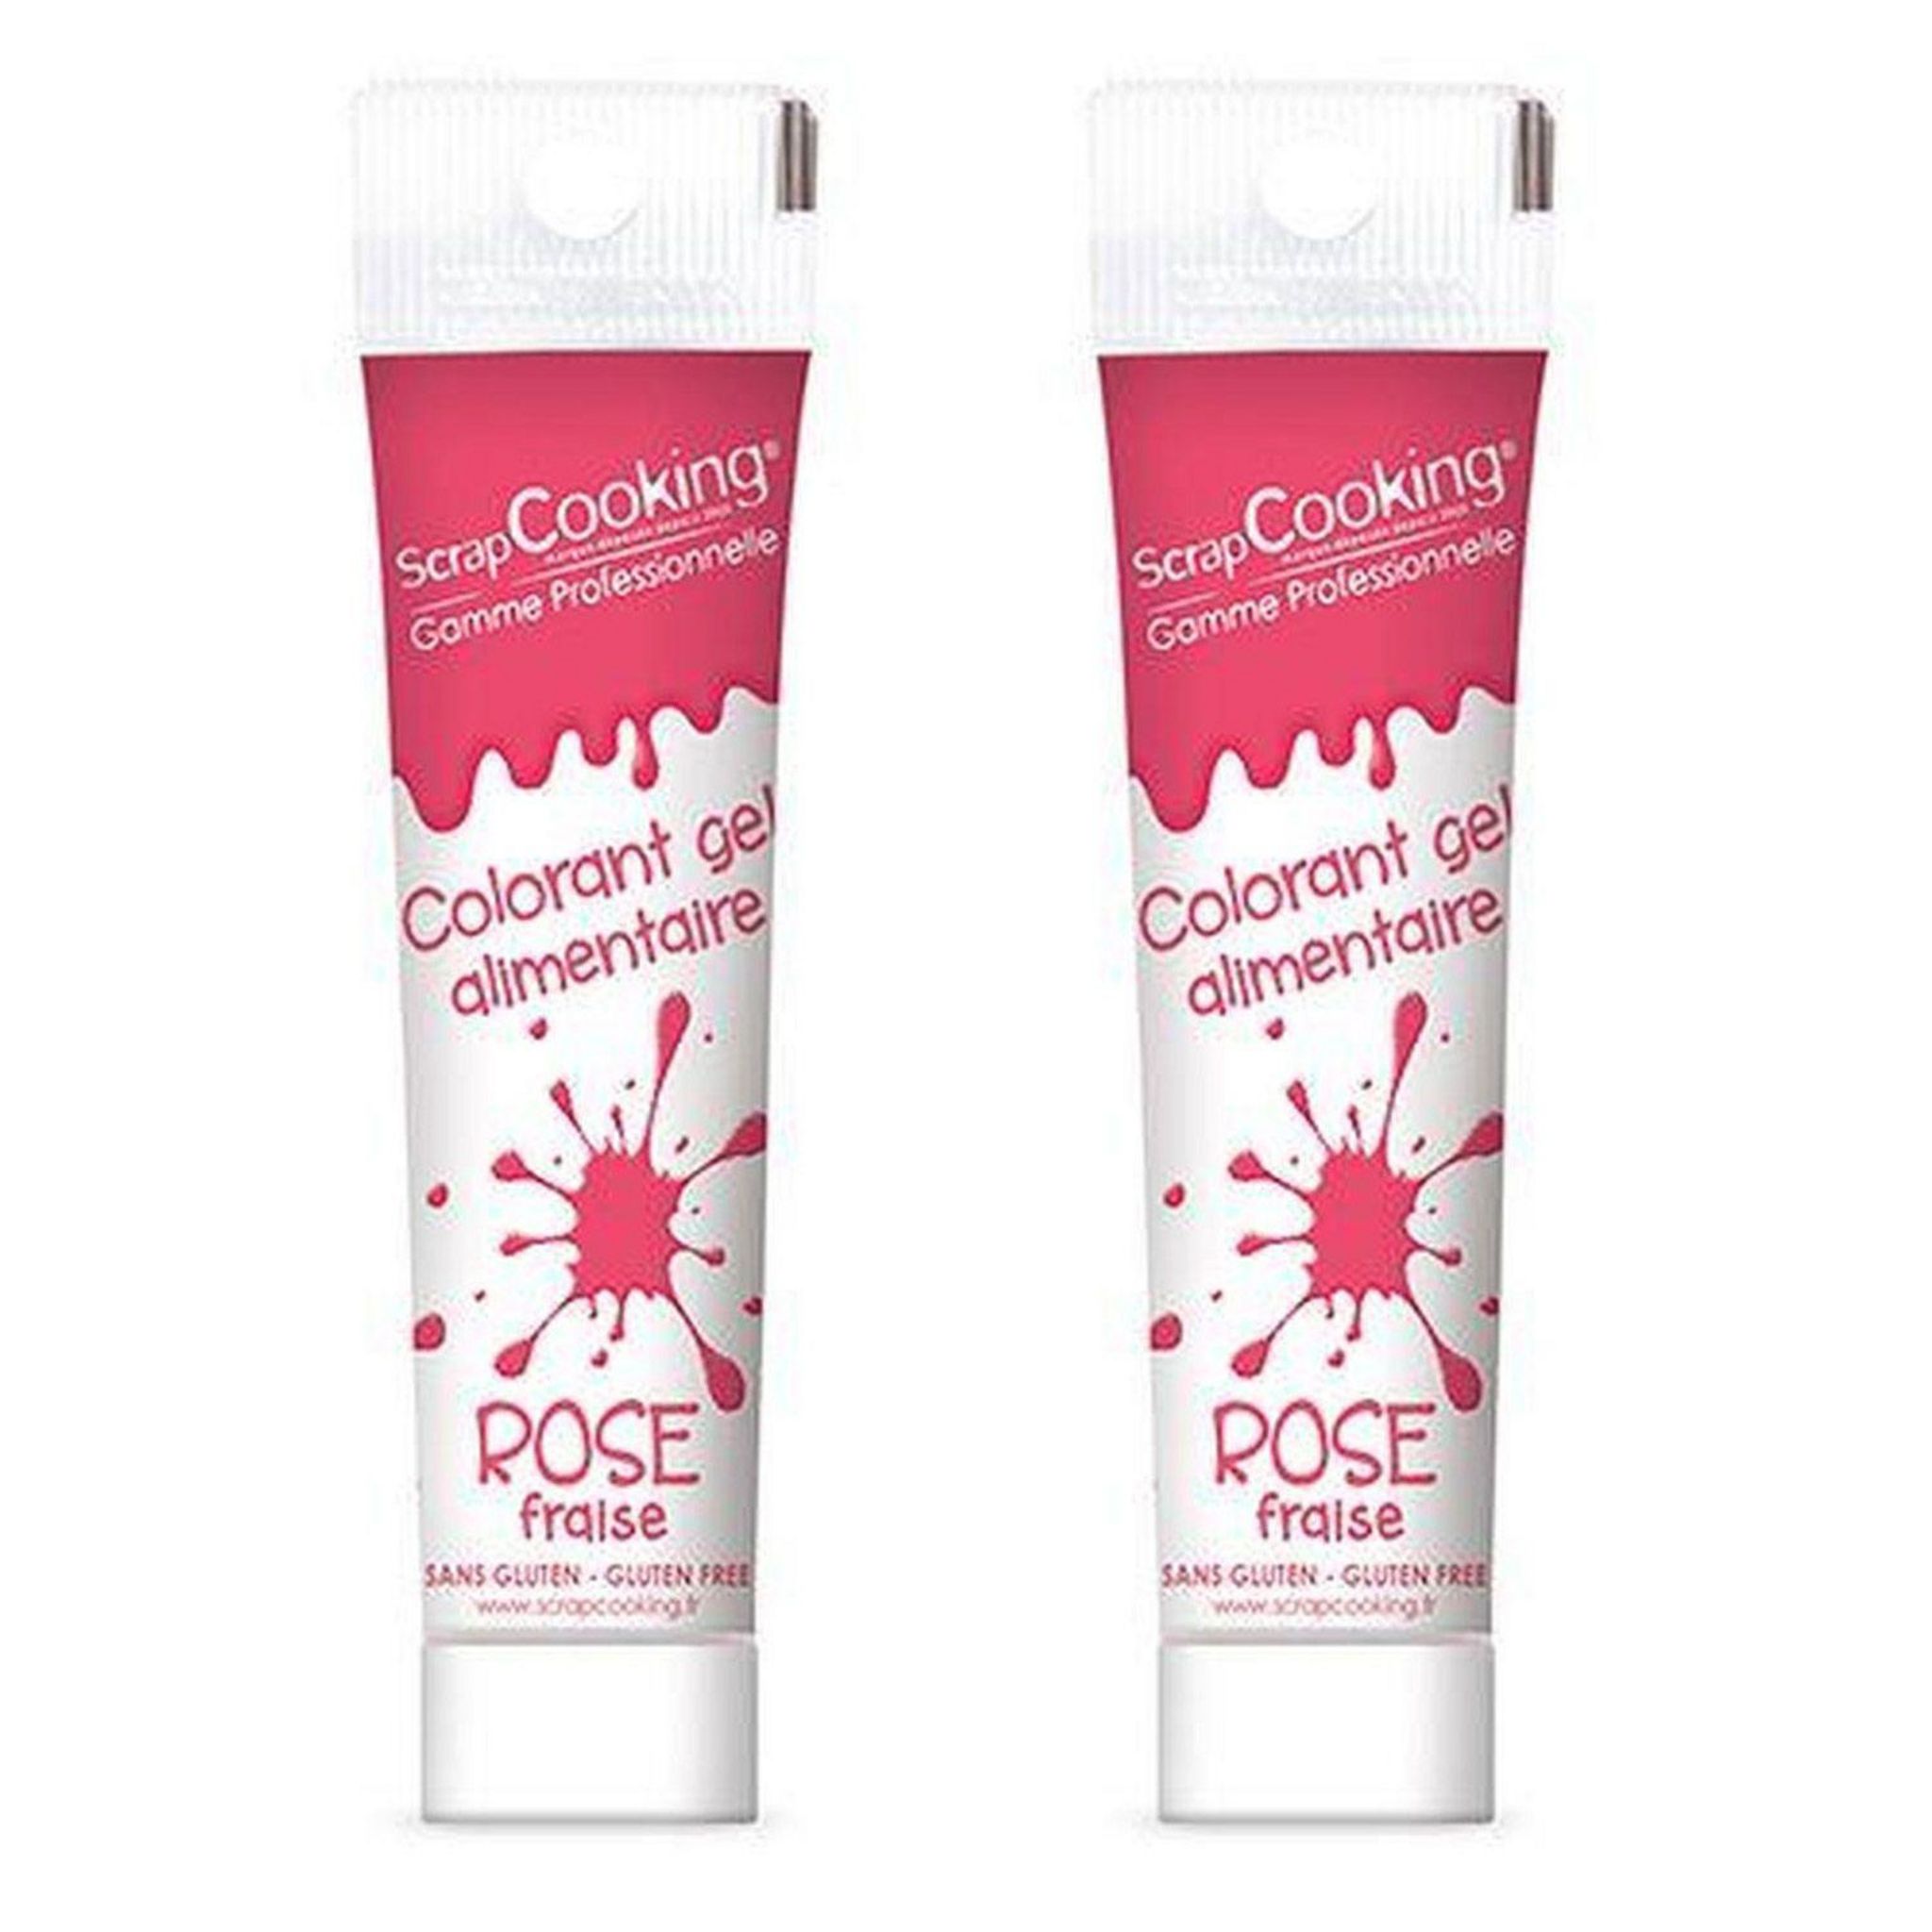 Scrapcooking - Gel colorant alimentaire rouge 20 g + Poudre